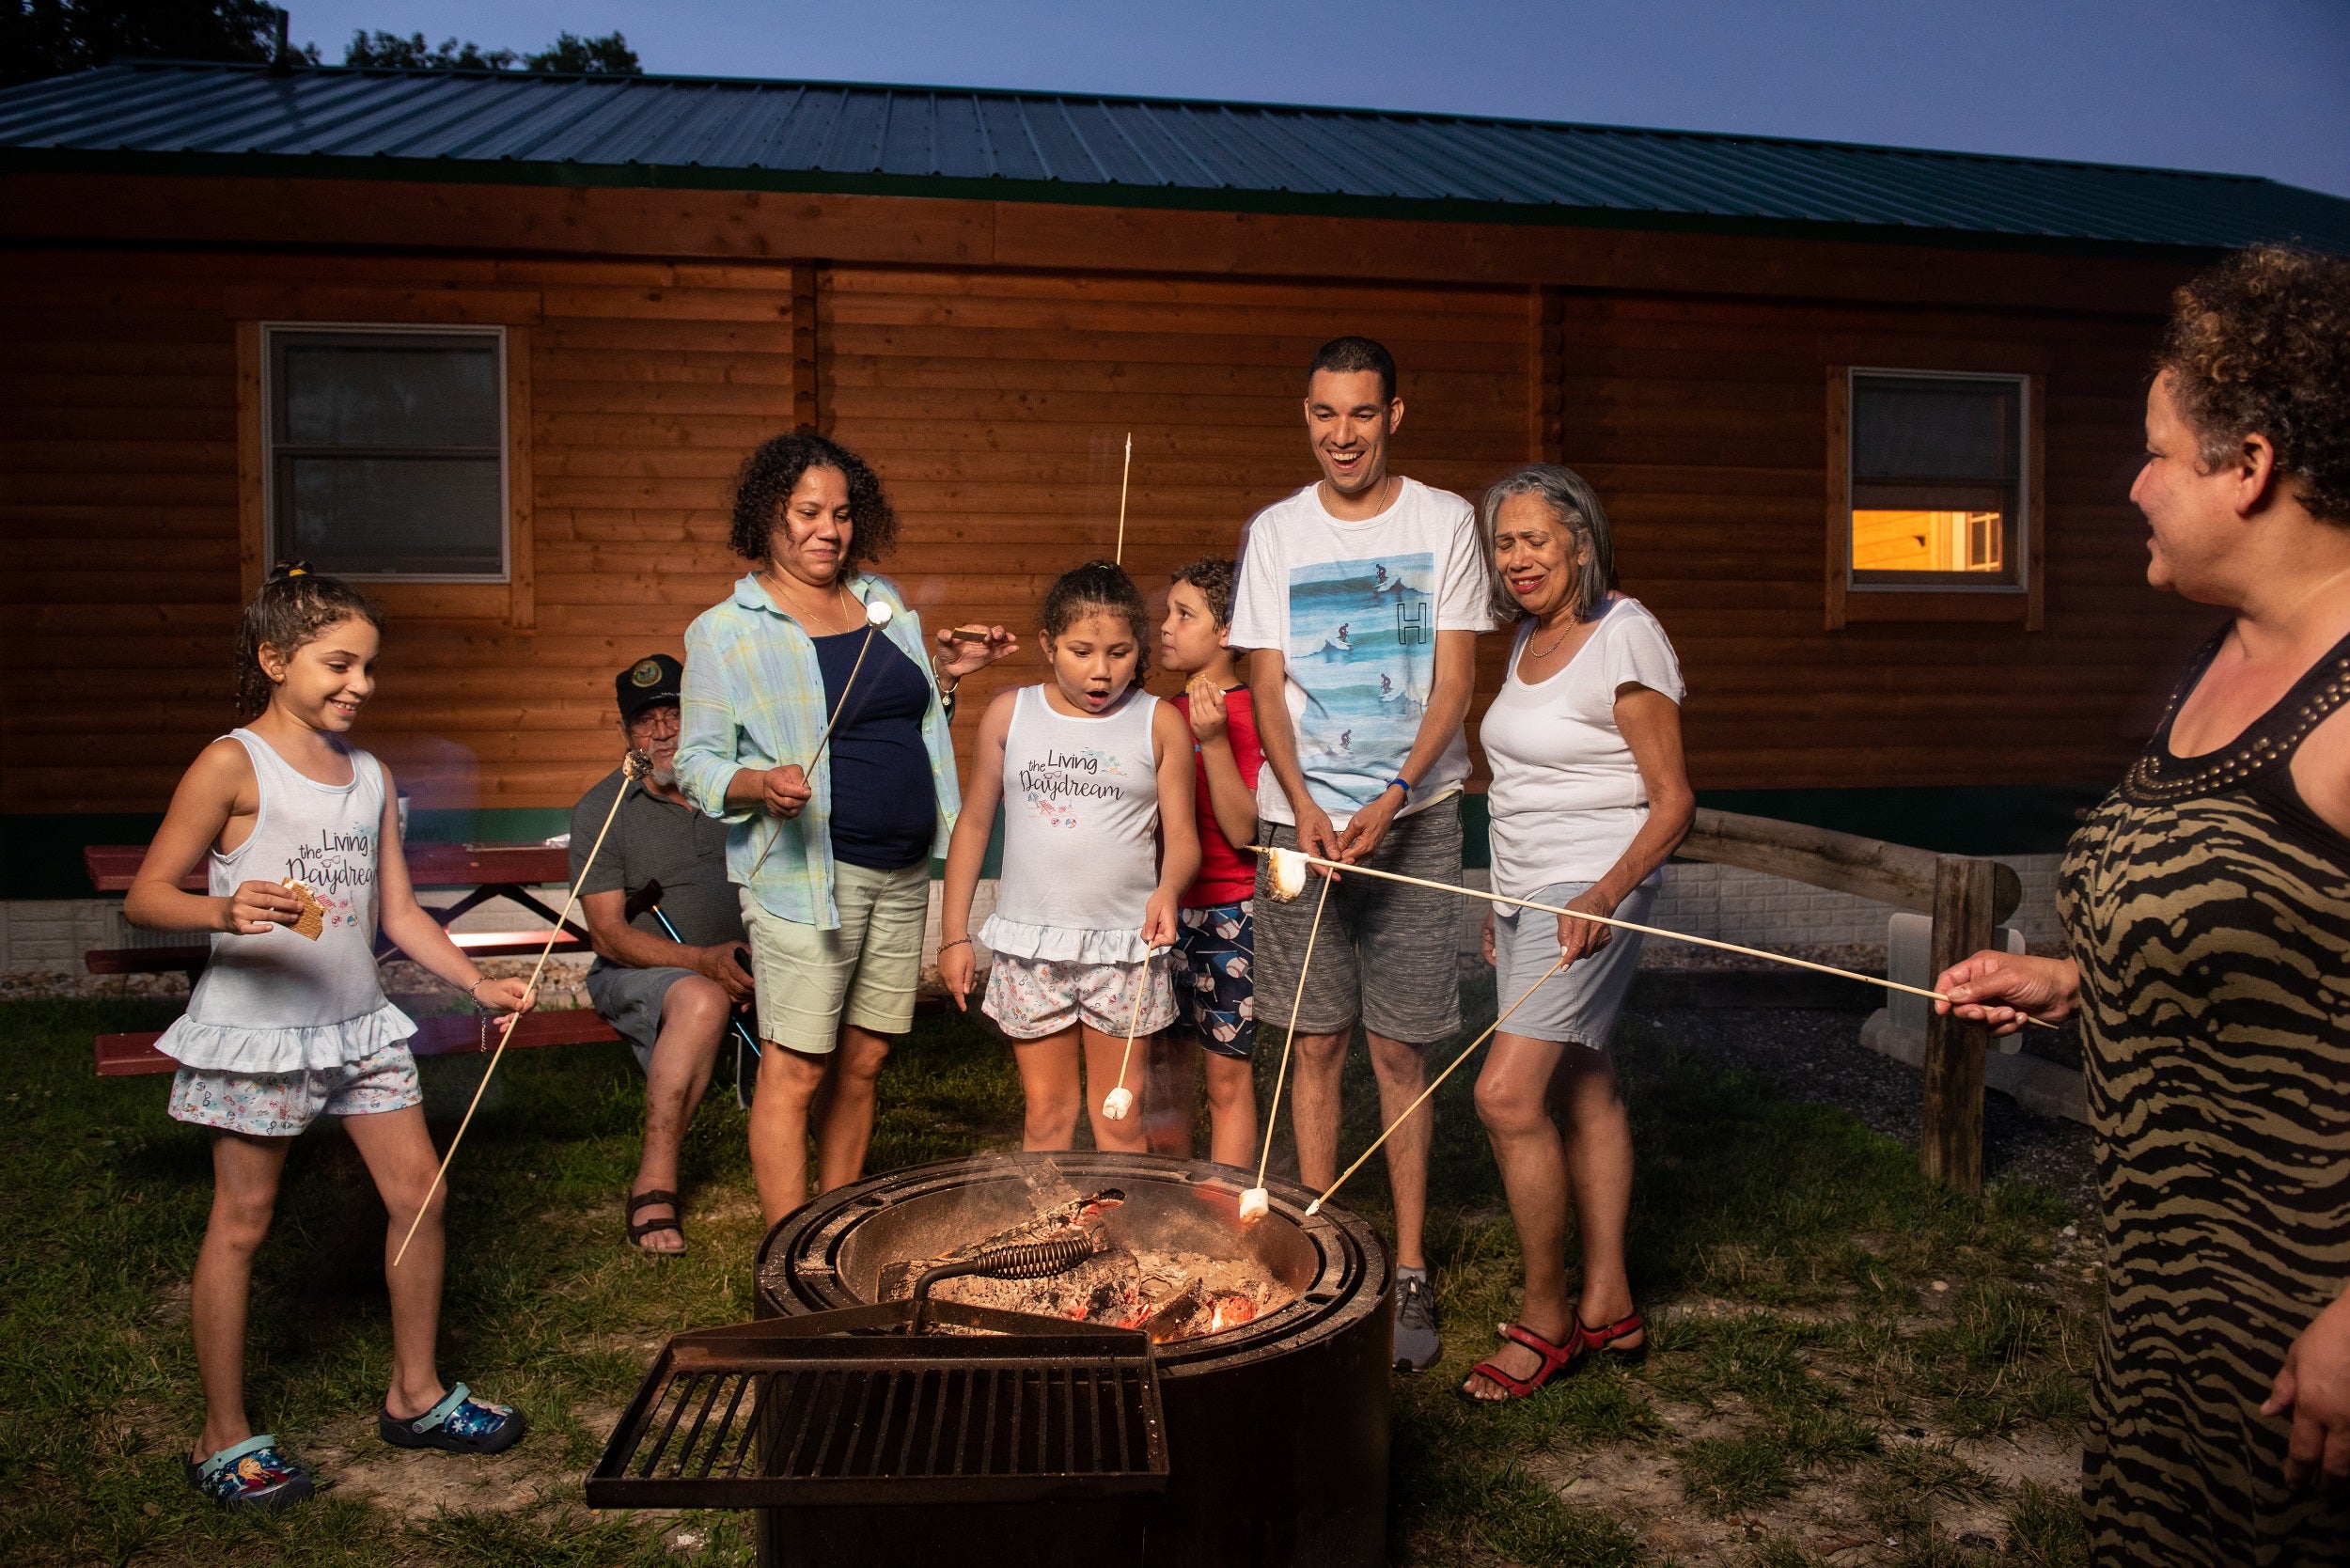 Cabins come with fire pits and outdoor picnic areas.